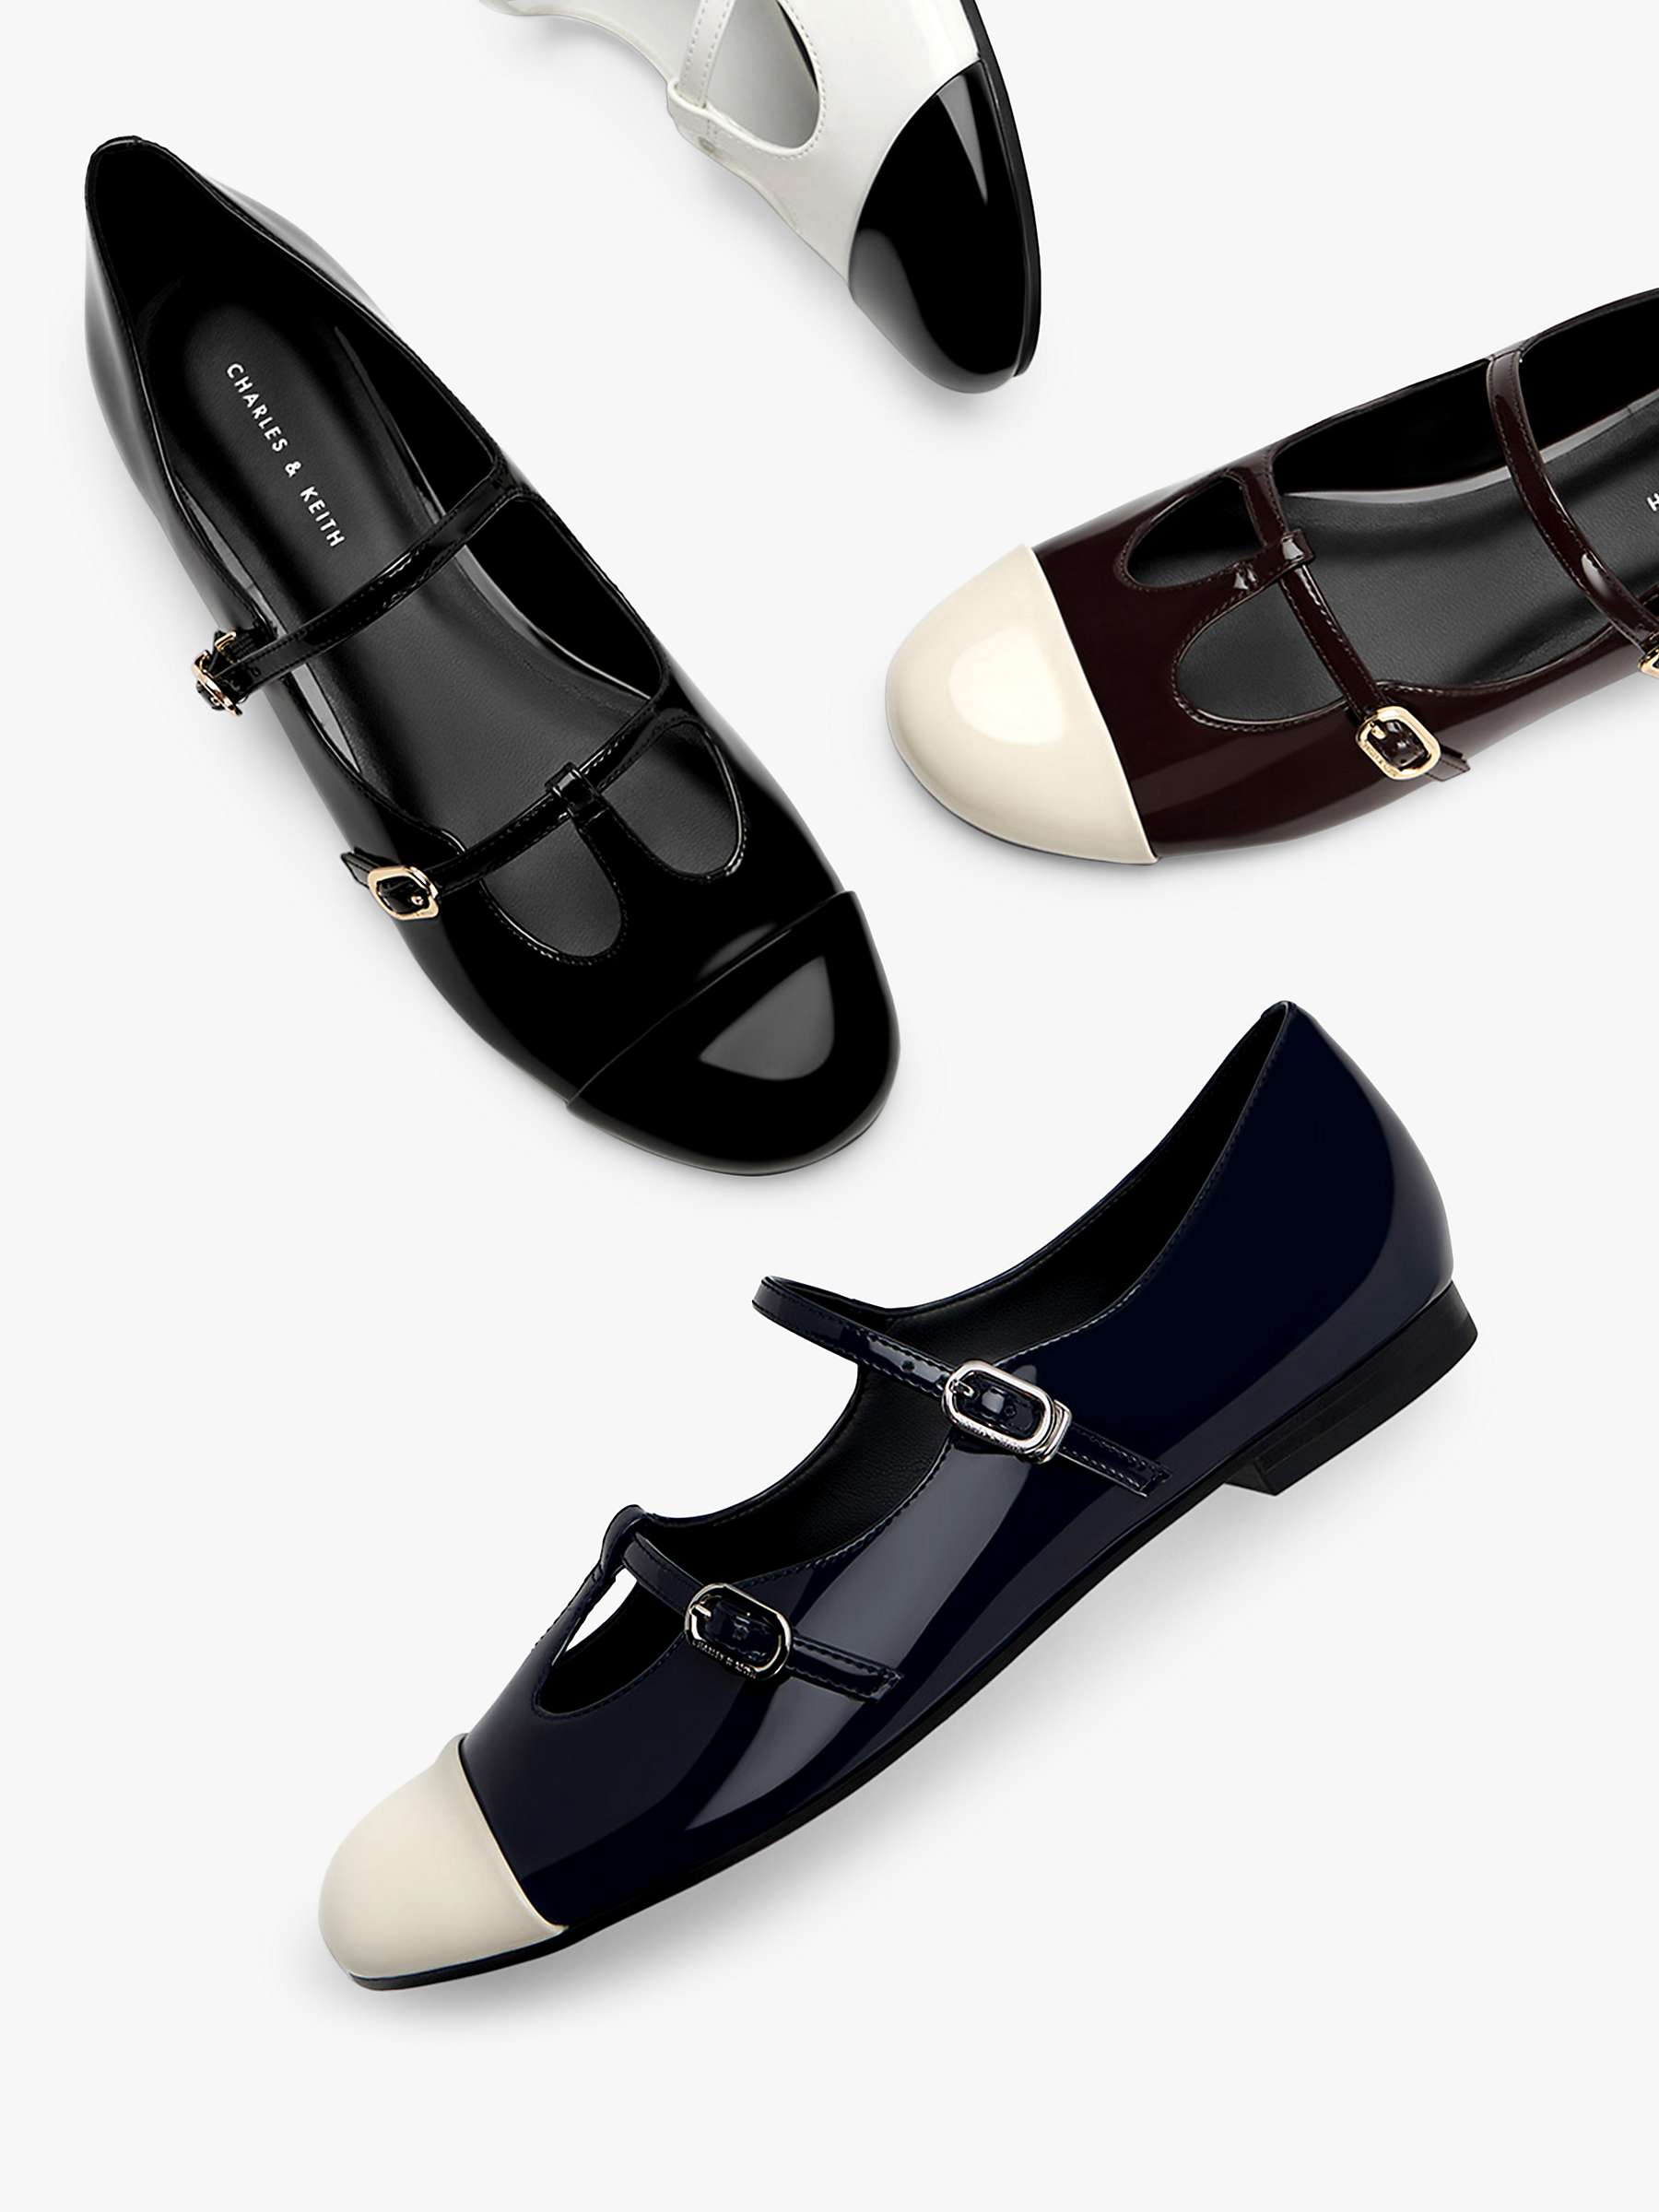 Buy CHARLES & KEITH Double Strap Mary Janes, Black Box Online at johnlewis.com